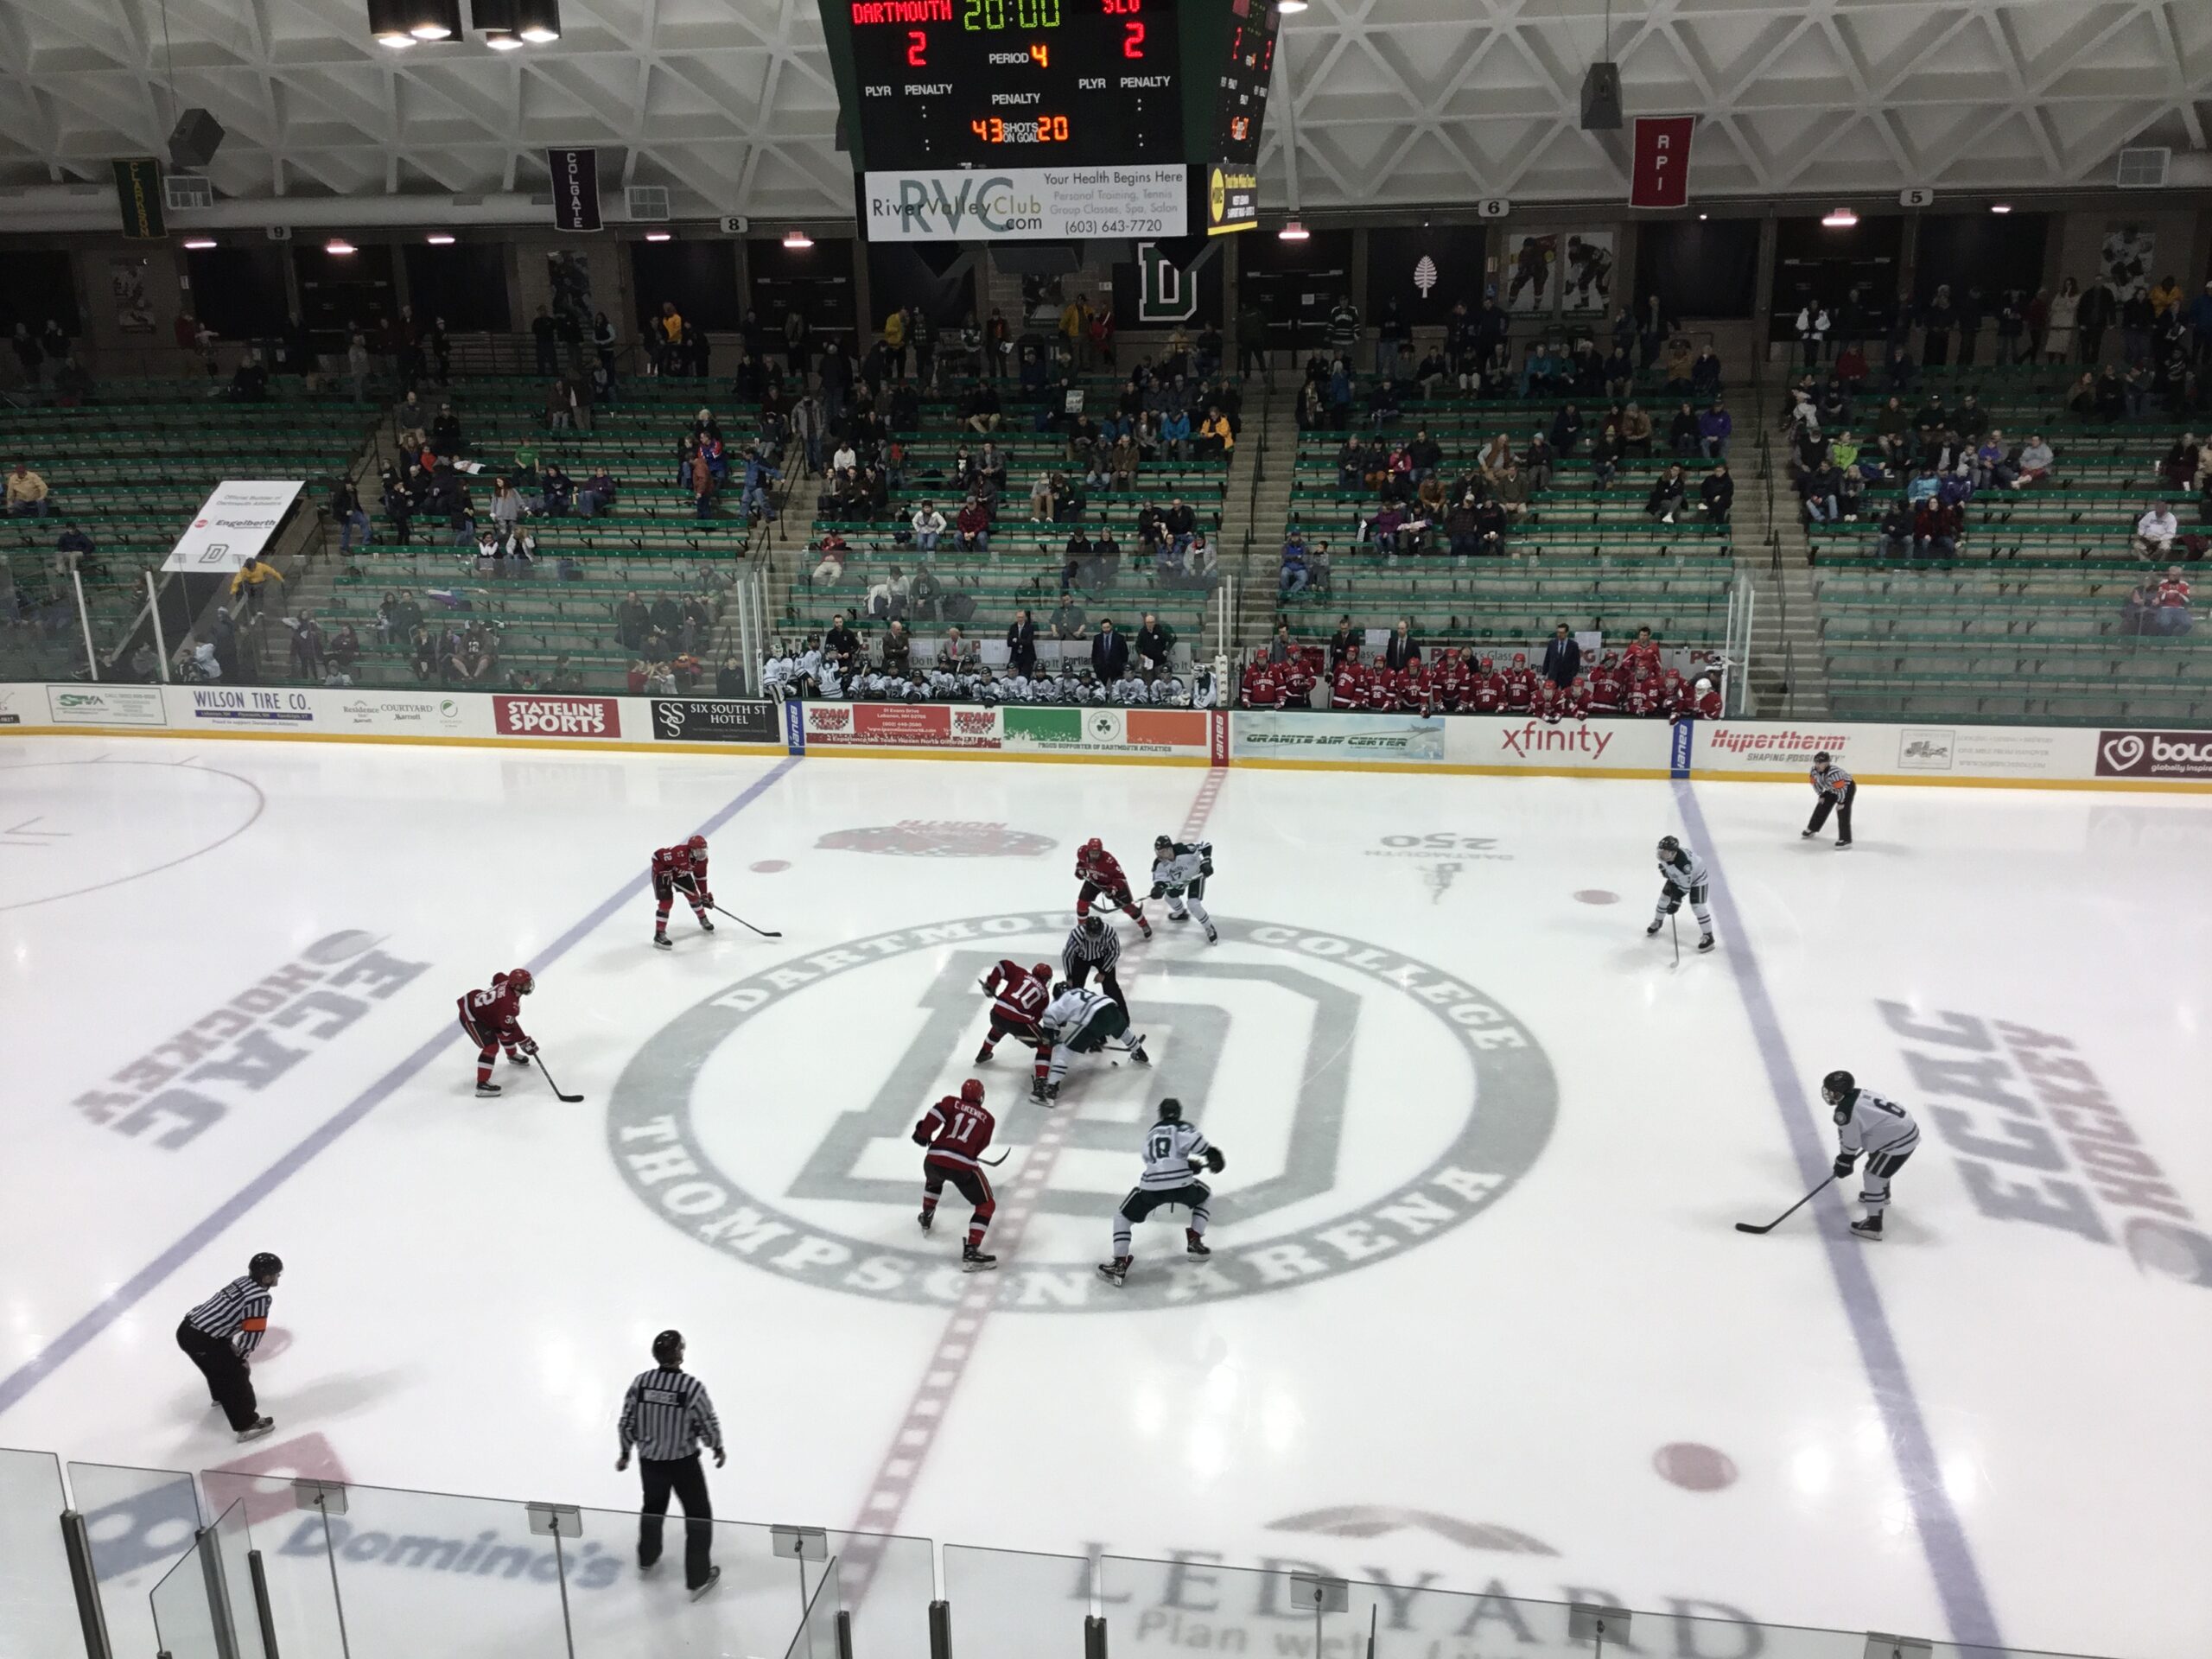 St. Lawrence Pulls Out Overtime Win To Stay Alive